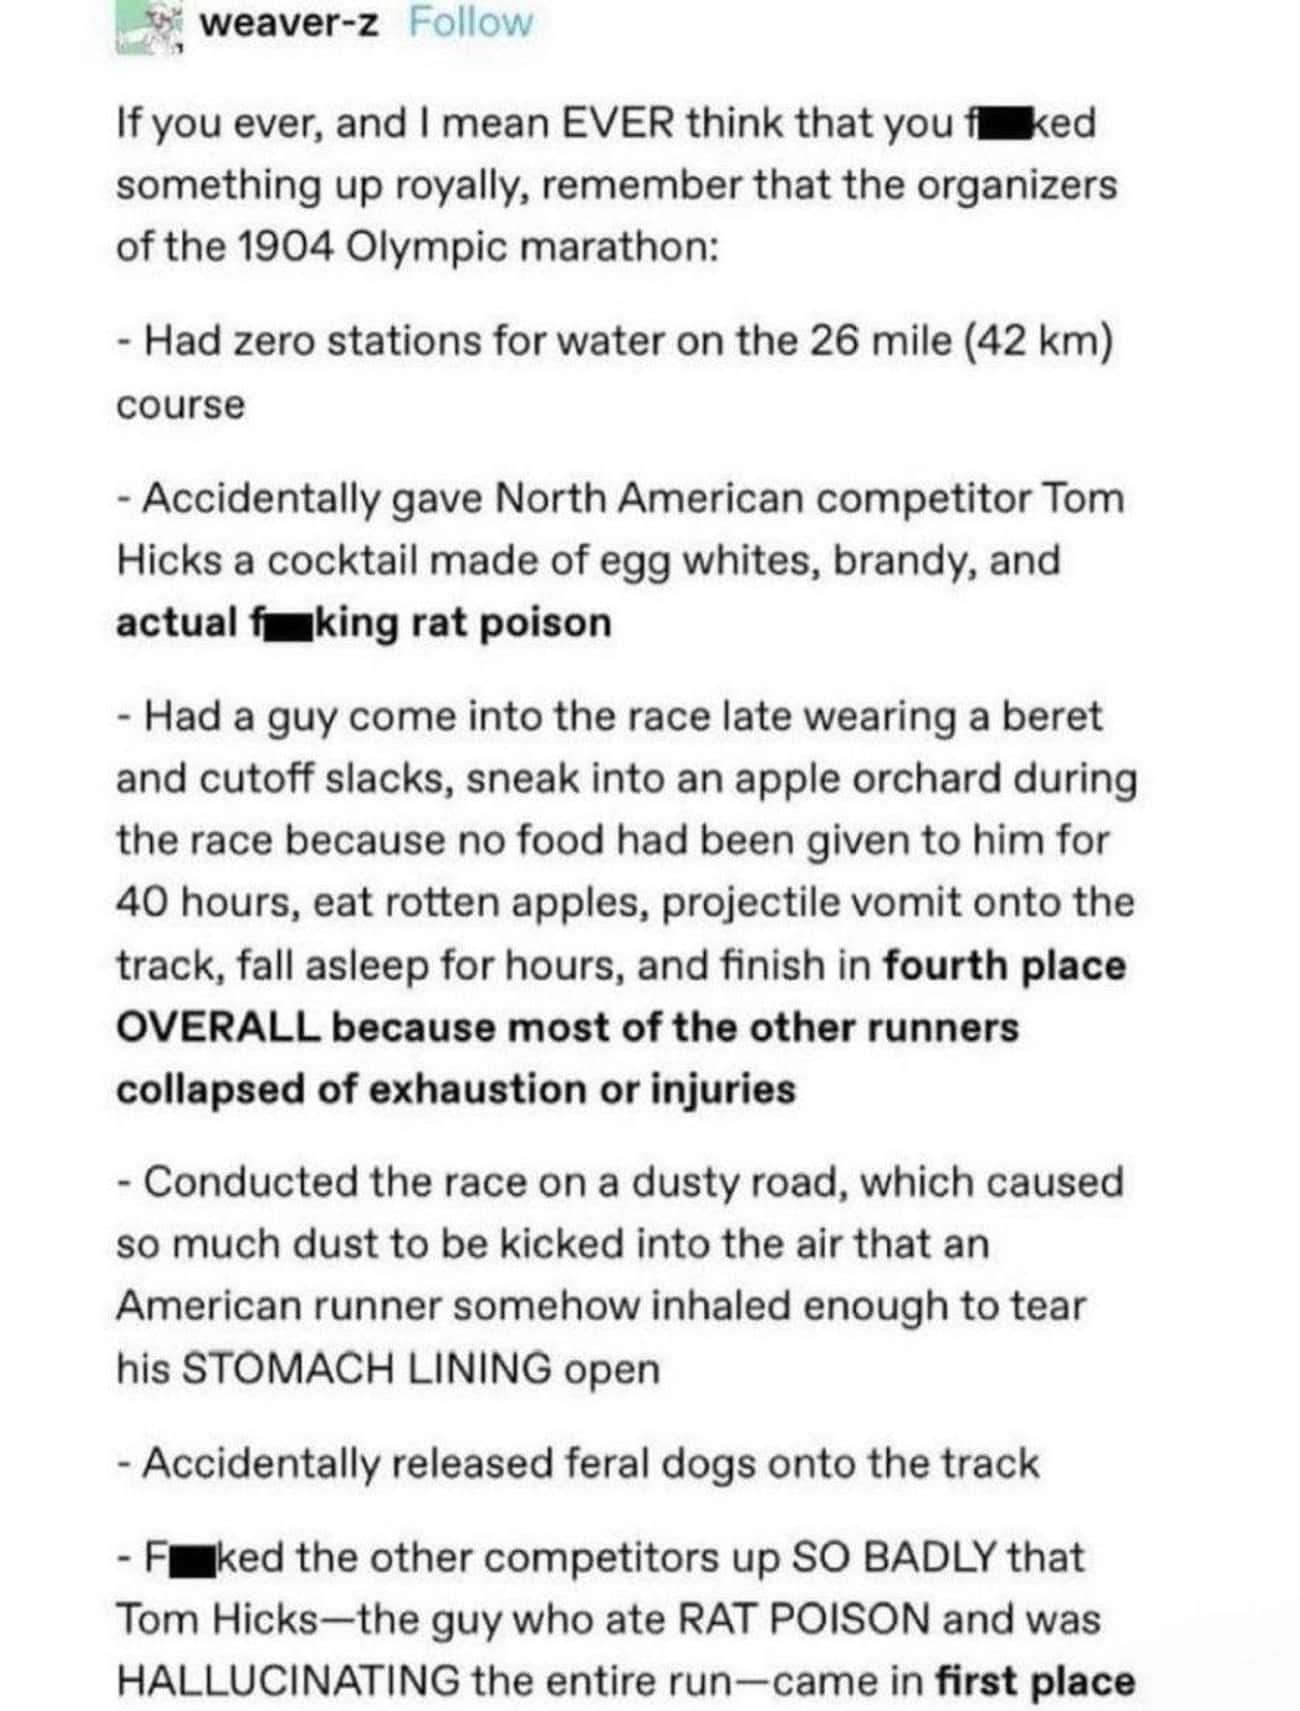 The Fact That The 1904 Olympic Marathon Was So Chaotic